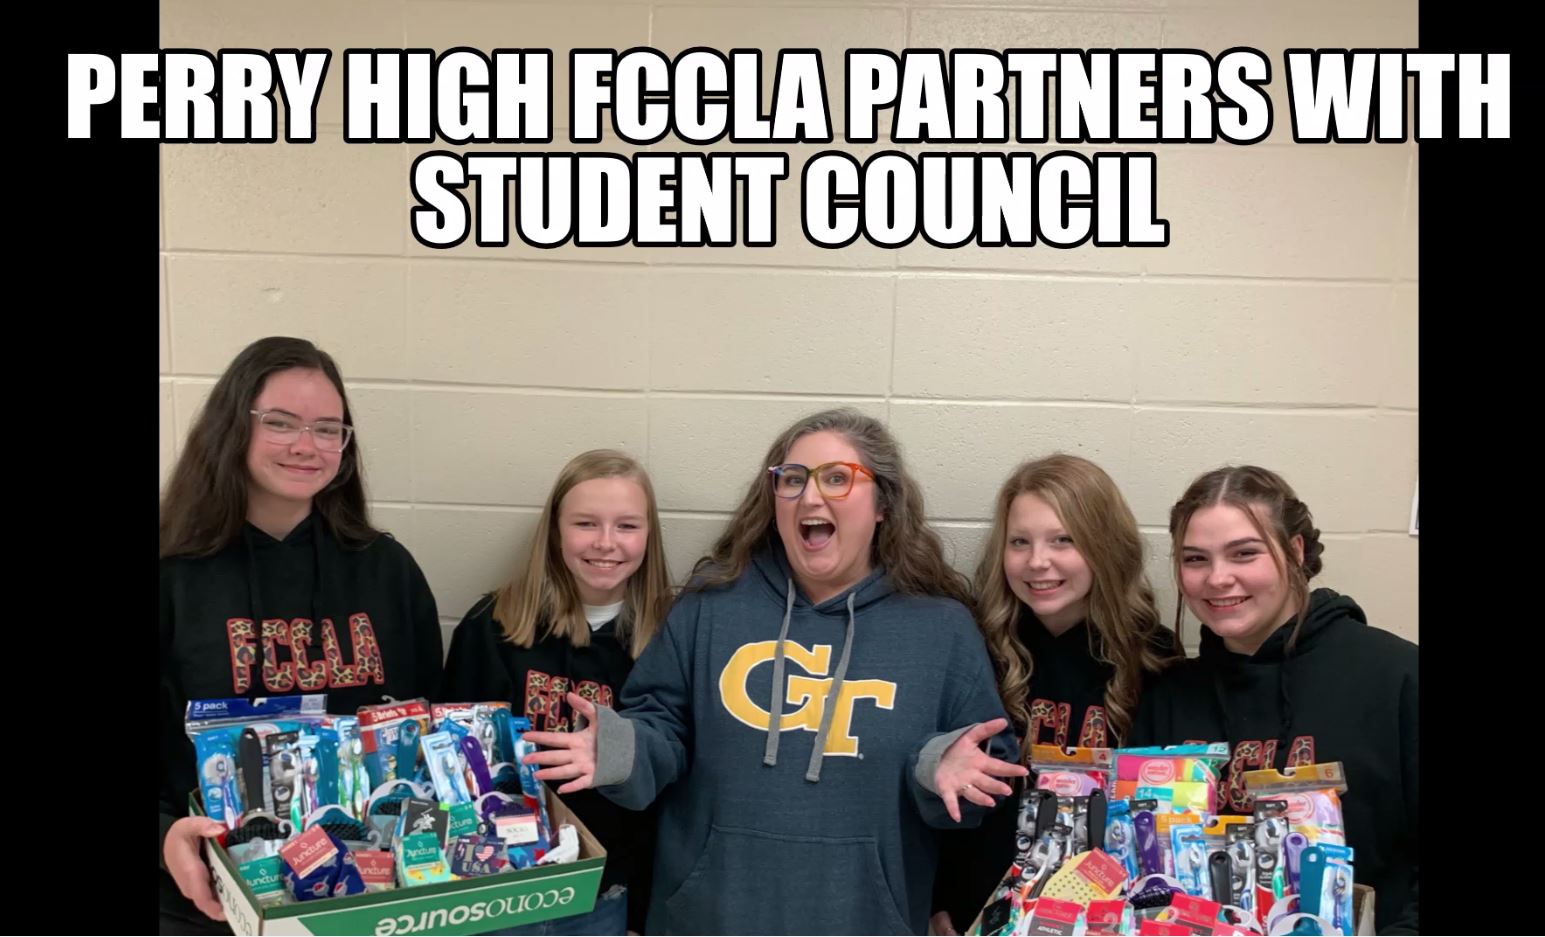 Perry High FCCLA Partners with Student Council